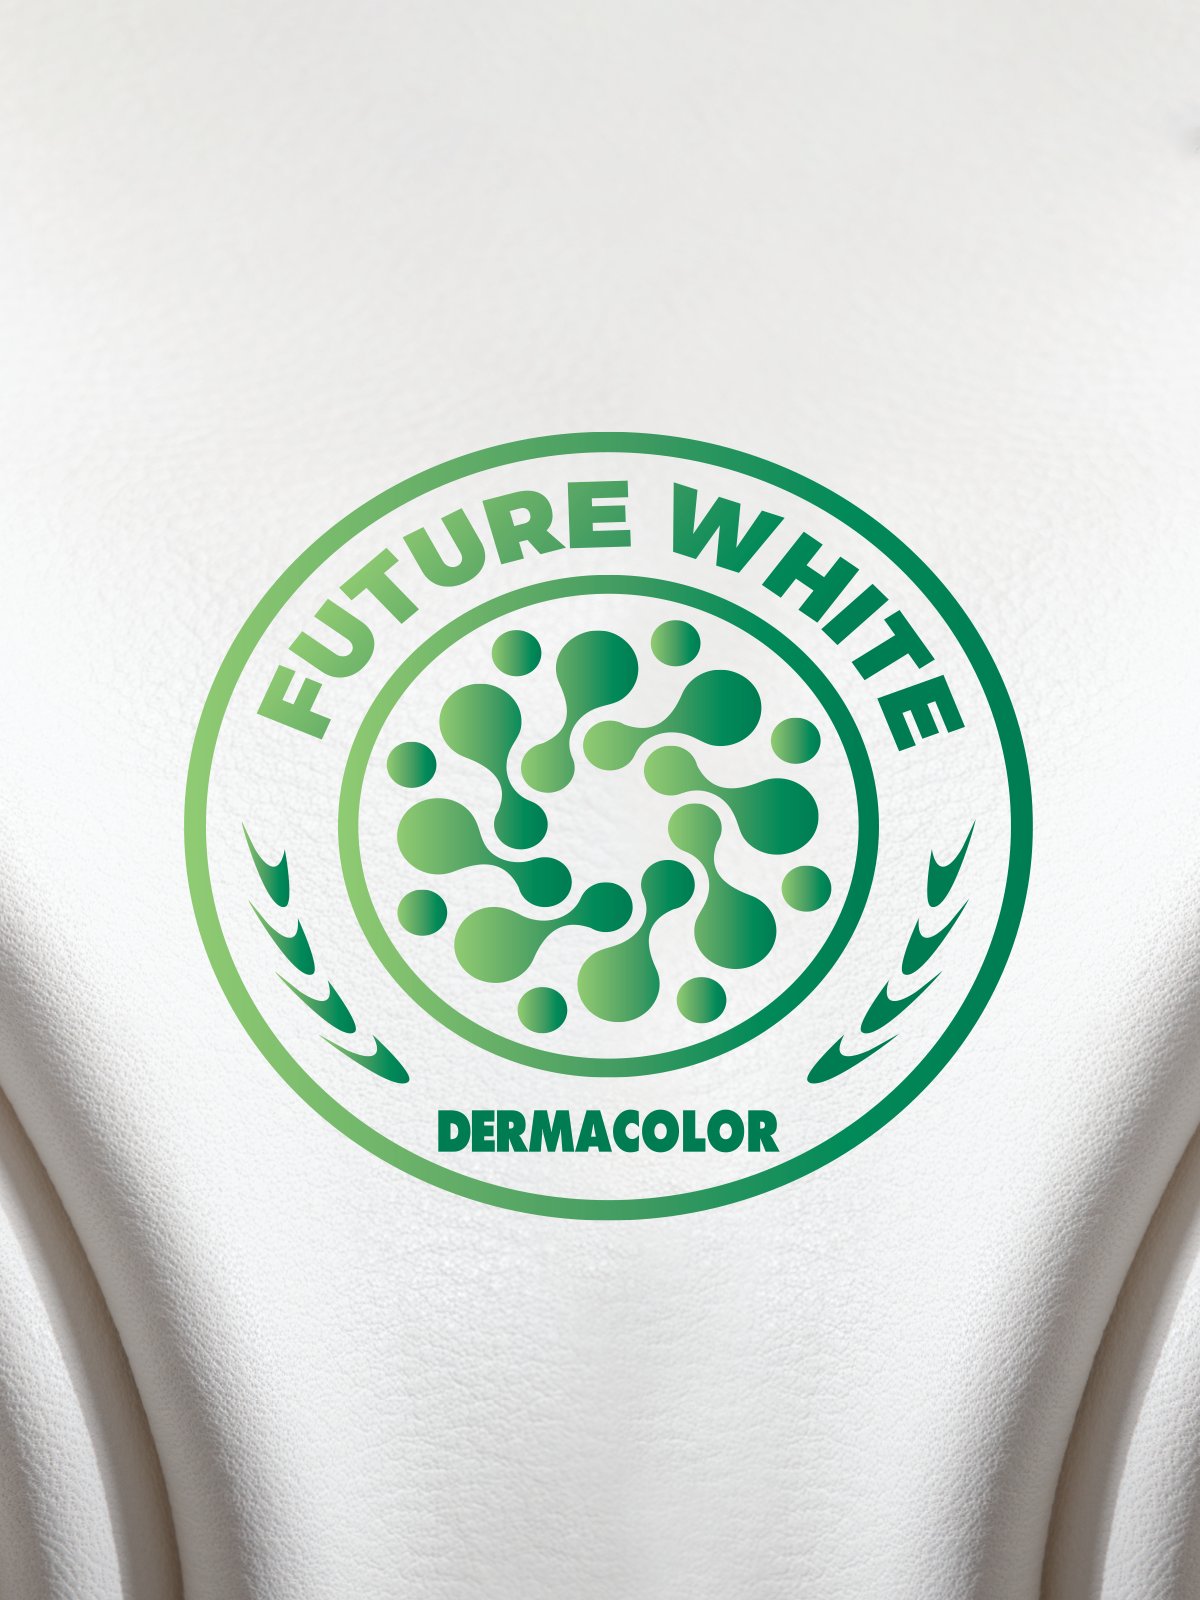 FUTURE WHITE, the environmentally sustainable pre-tanning system by DERMACOLOR